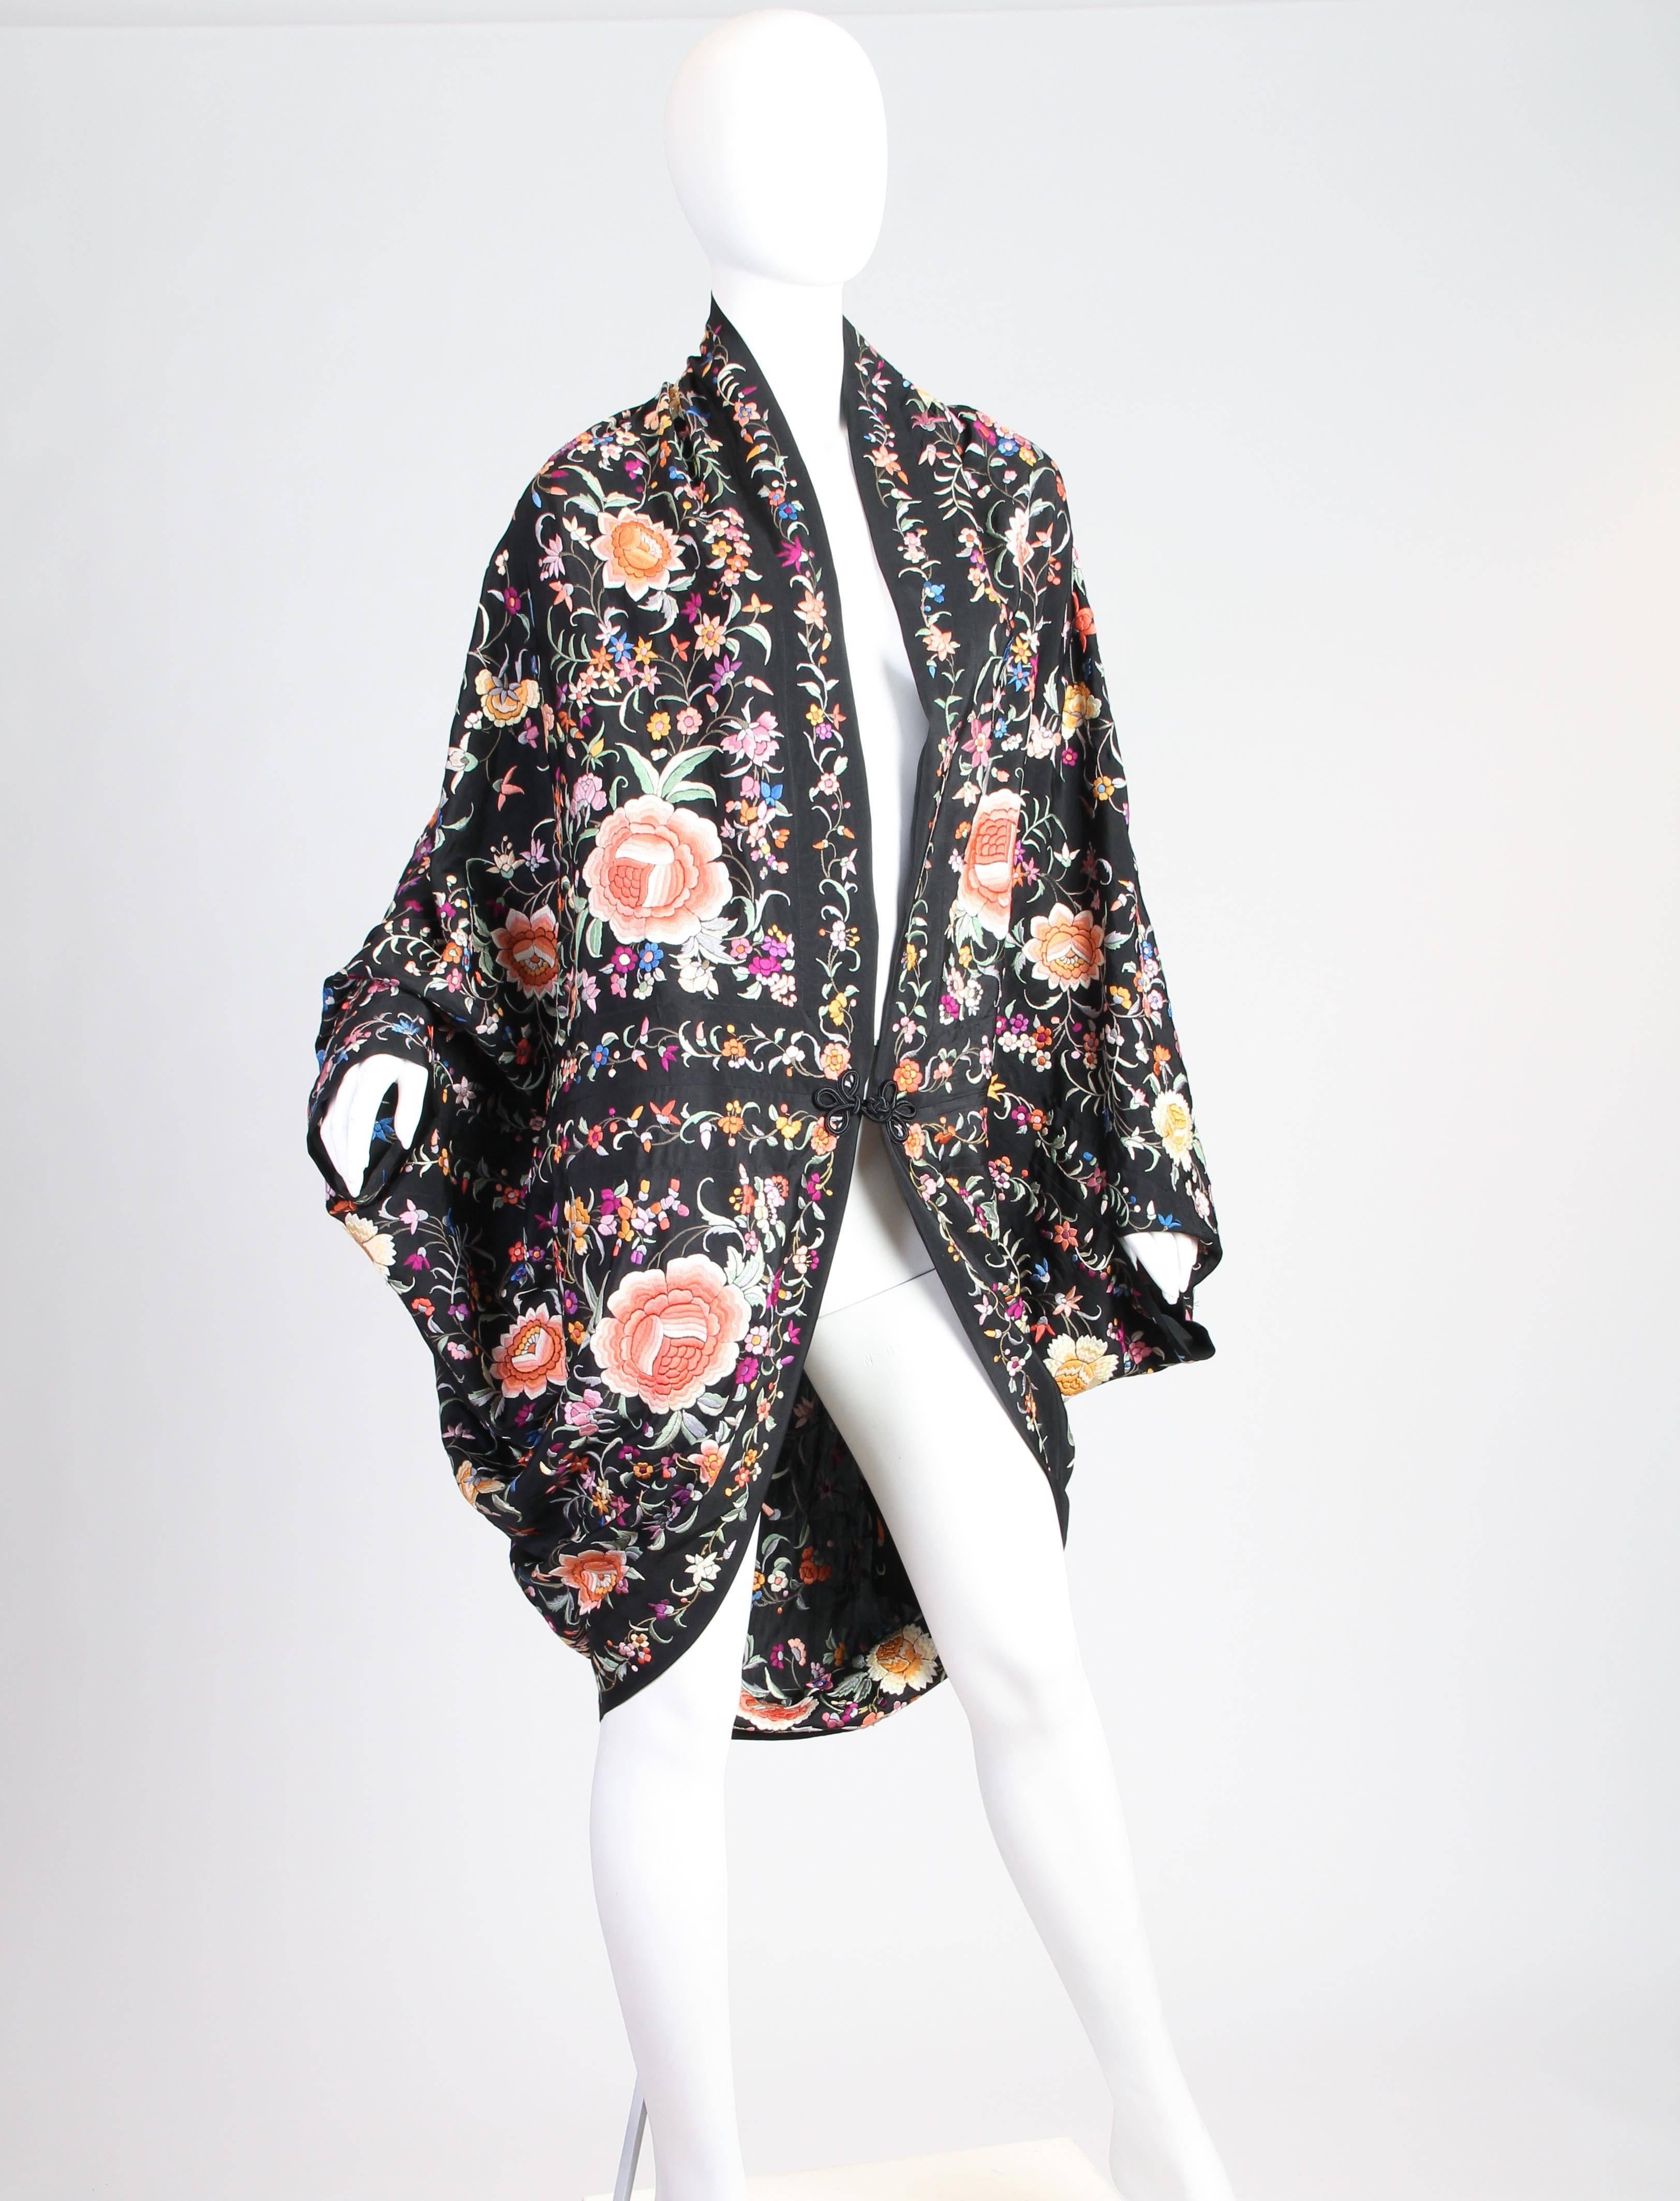 This is a stunning cocoon coat, made of a re-sewn shawl and most likely dating from the late 1910s or early 1920s. In the early 1910s, Poiret began designing coccoon coats to accent the new fashions of the day, which were becoming slimmer and more